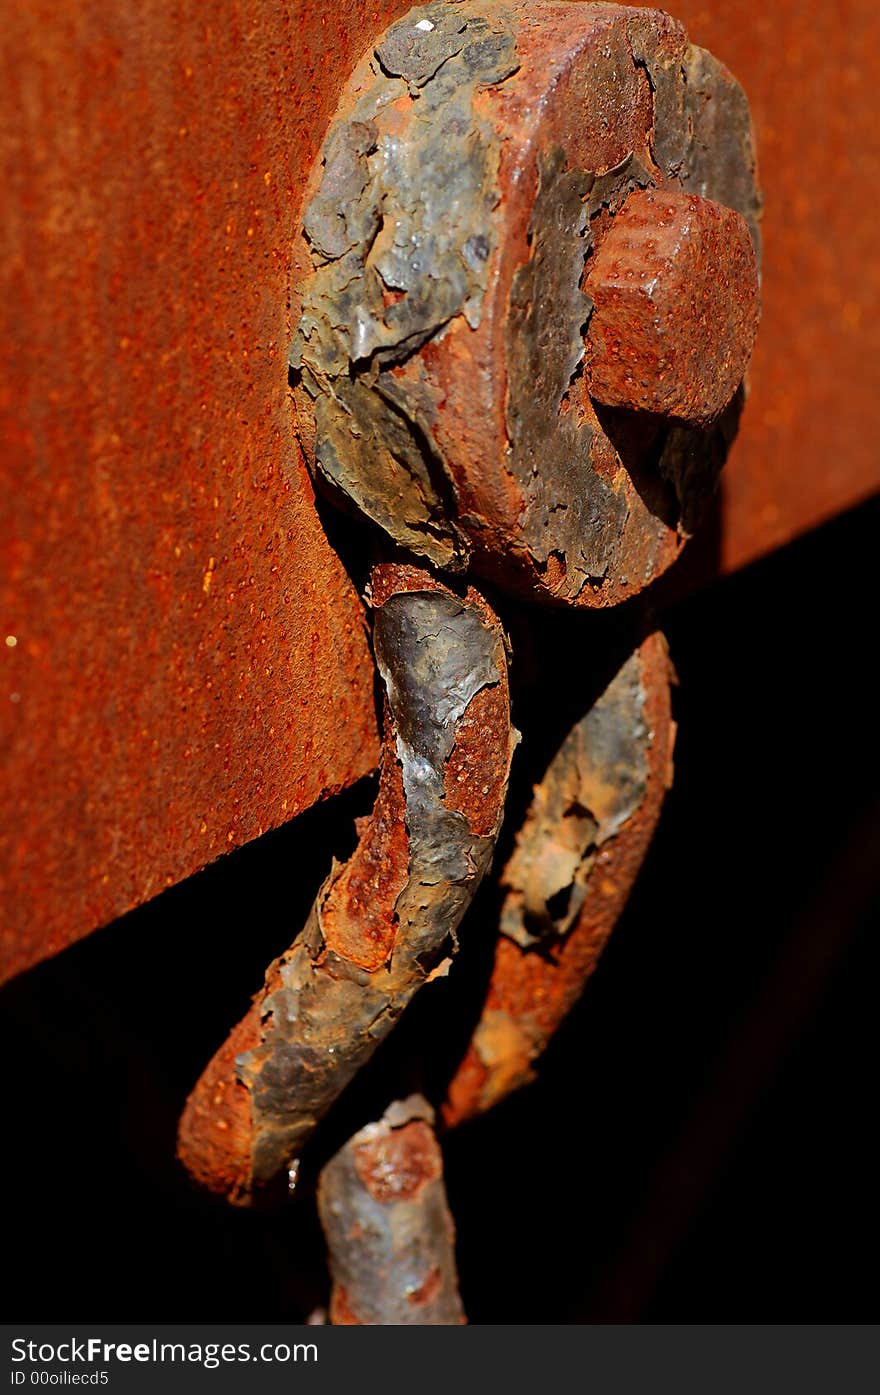 Image of a very old vintage rusted bolt